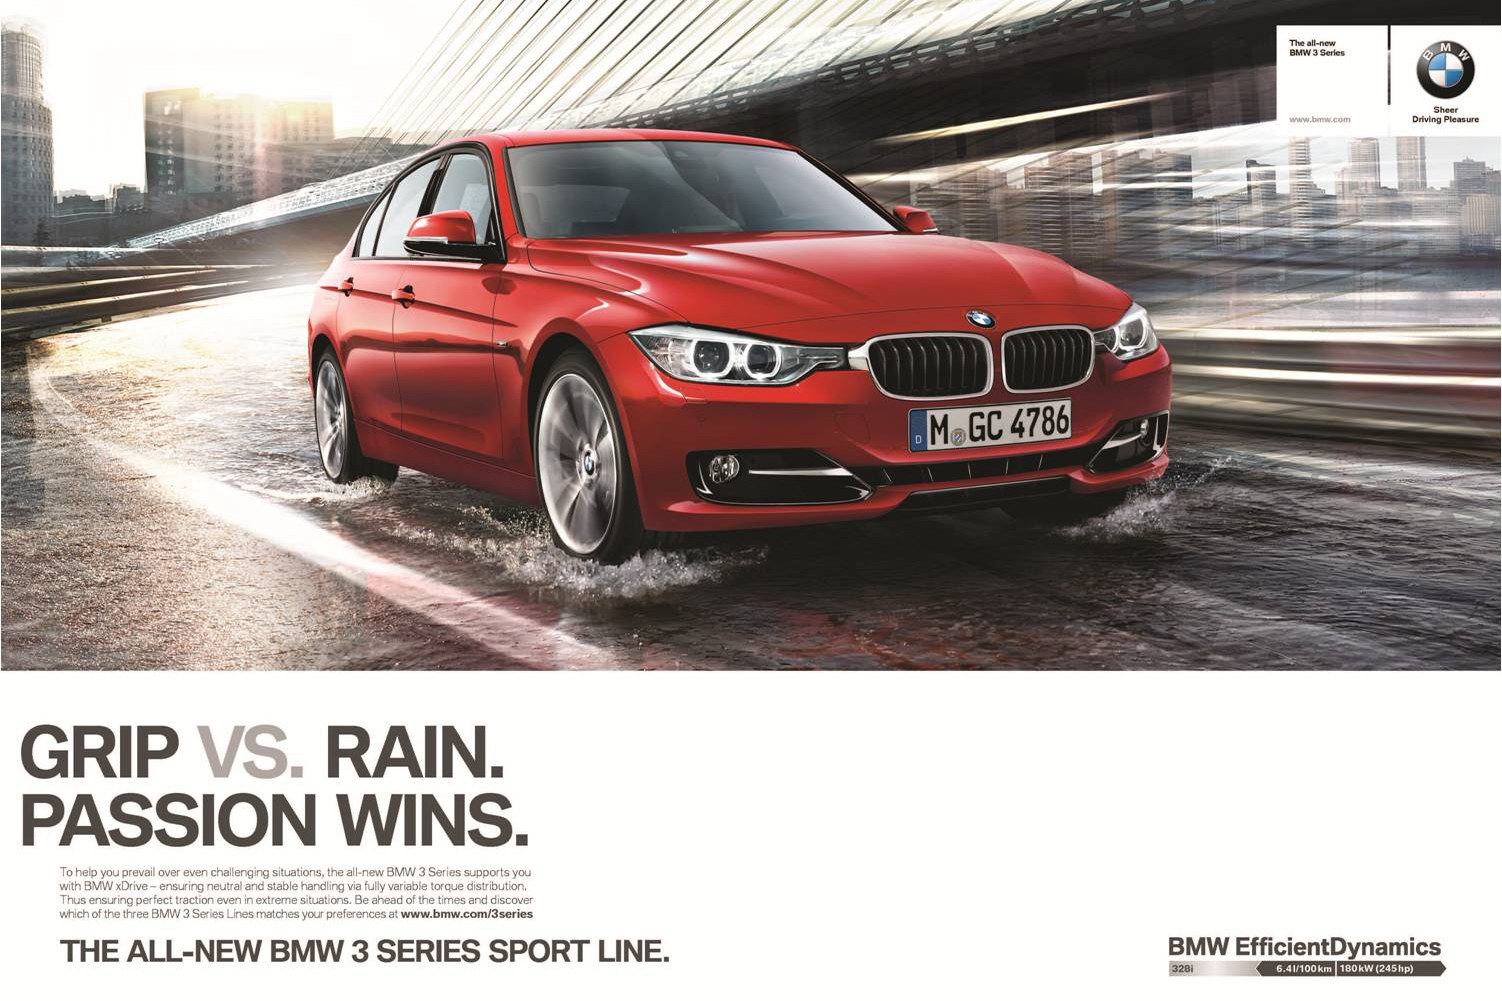 BMW 3 Series Ad campaign